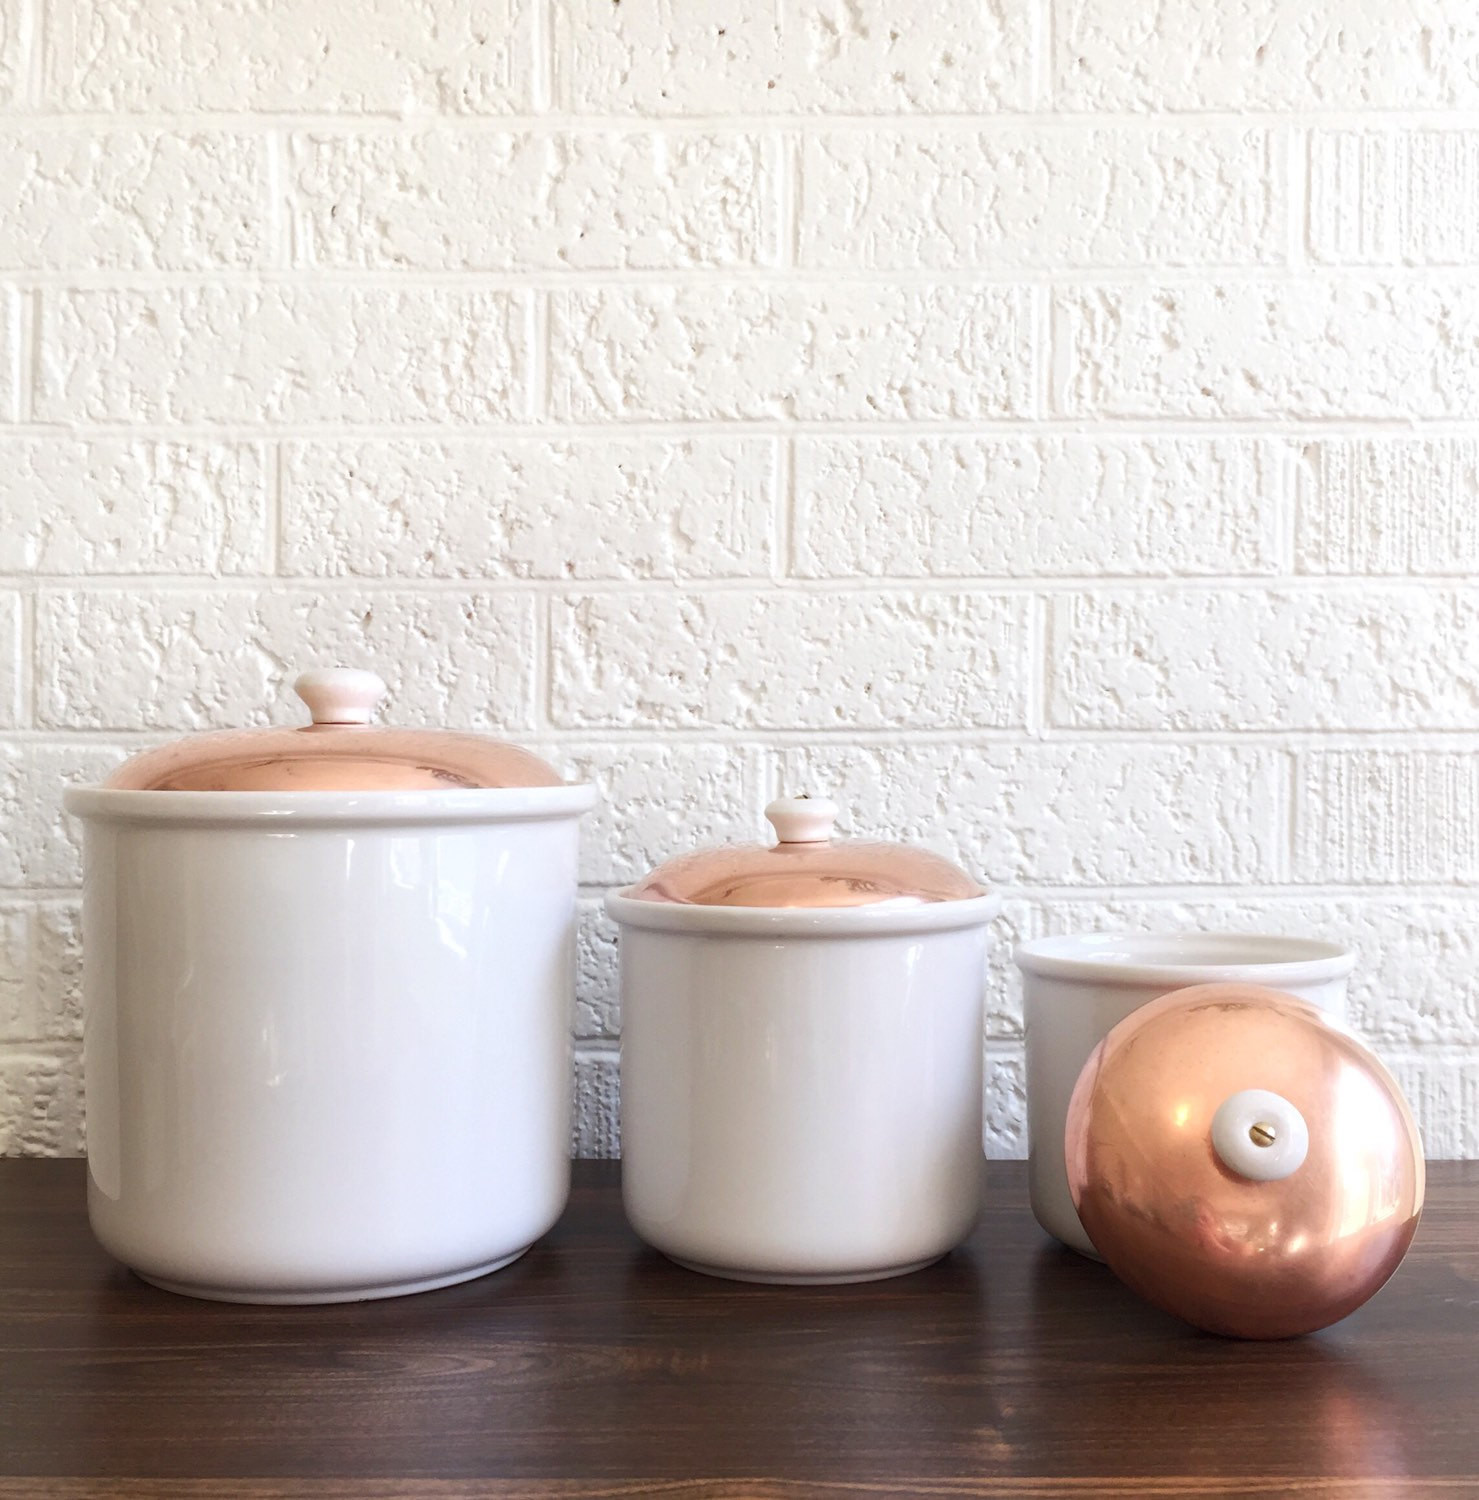 White Kitchen Canisters
 Vintage Copper and White Kitchen Canisters Ceramic Copper